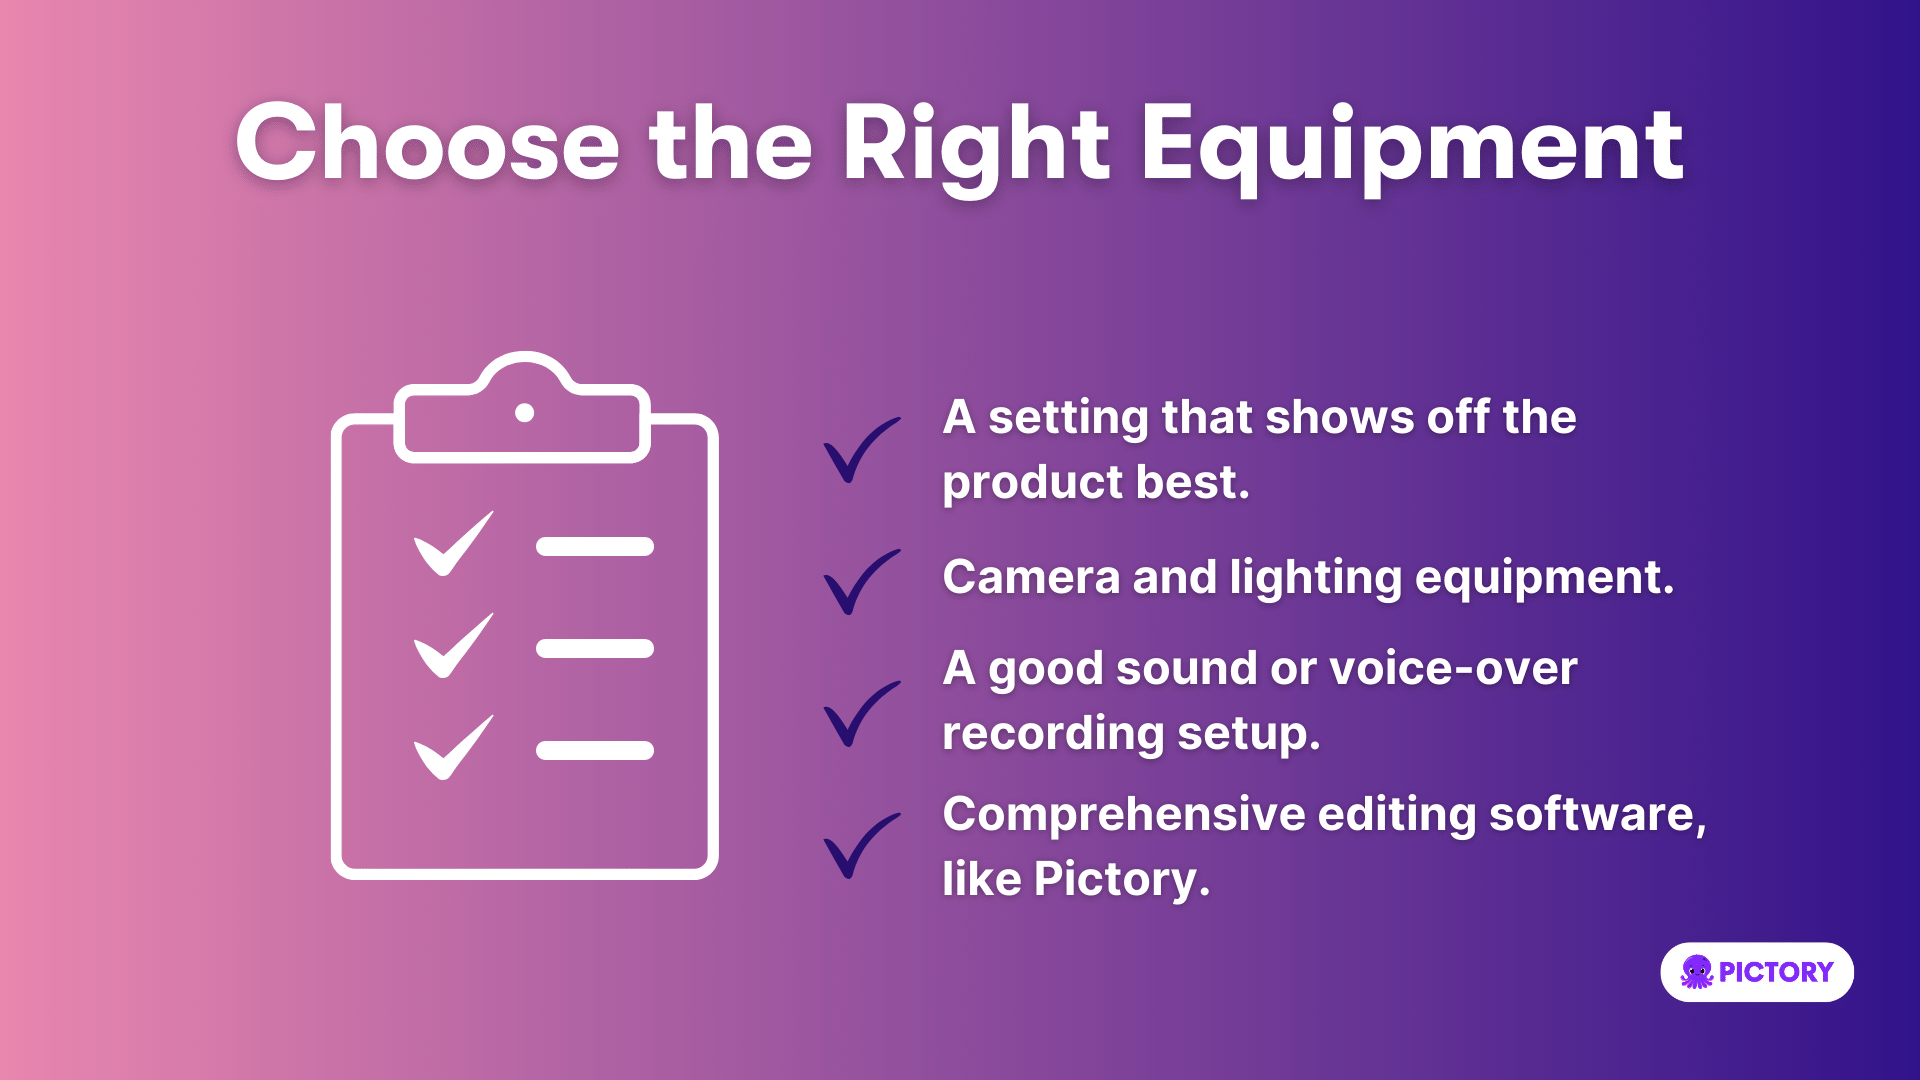 checklist of equipment listed below 